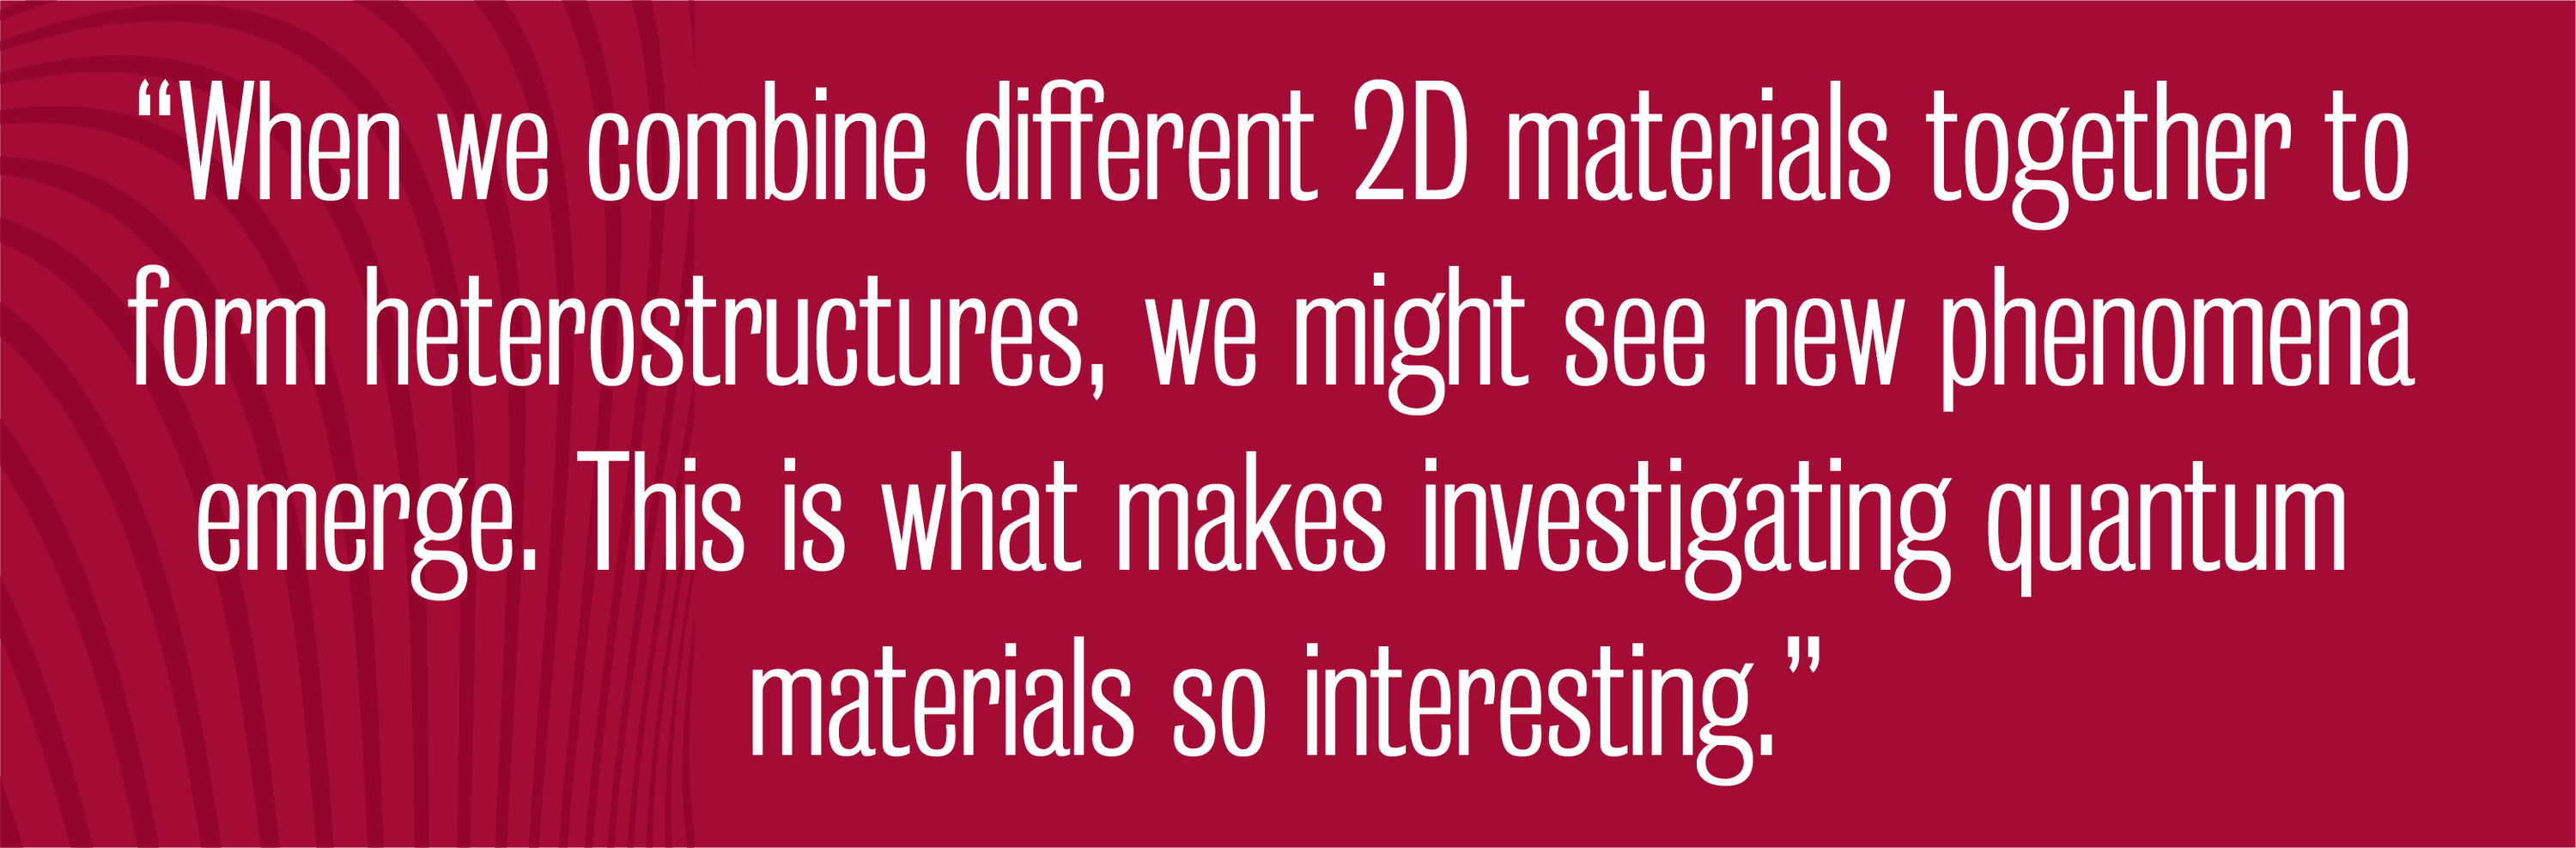 Quote - When we combine different 2D materials together to form heterostructures, we might see new phenomena emerge. This is what makes investigating quantum materials so interesting.